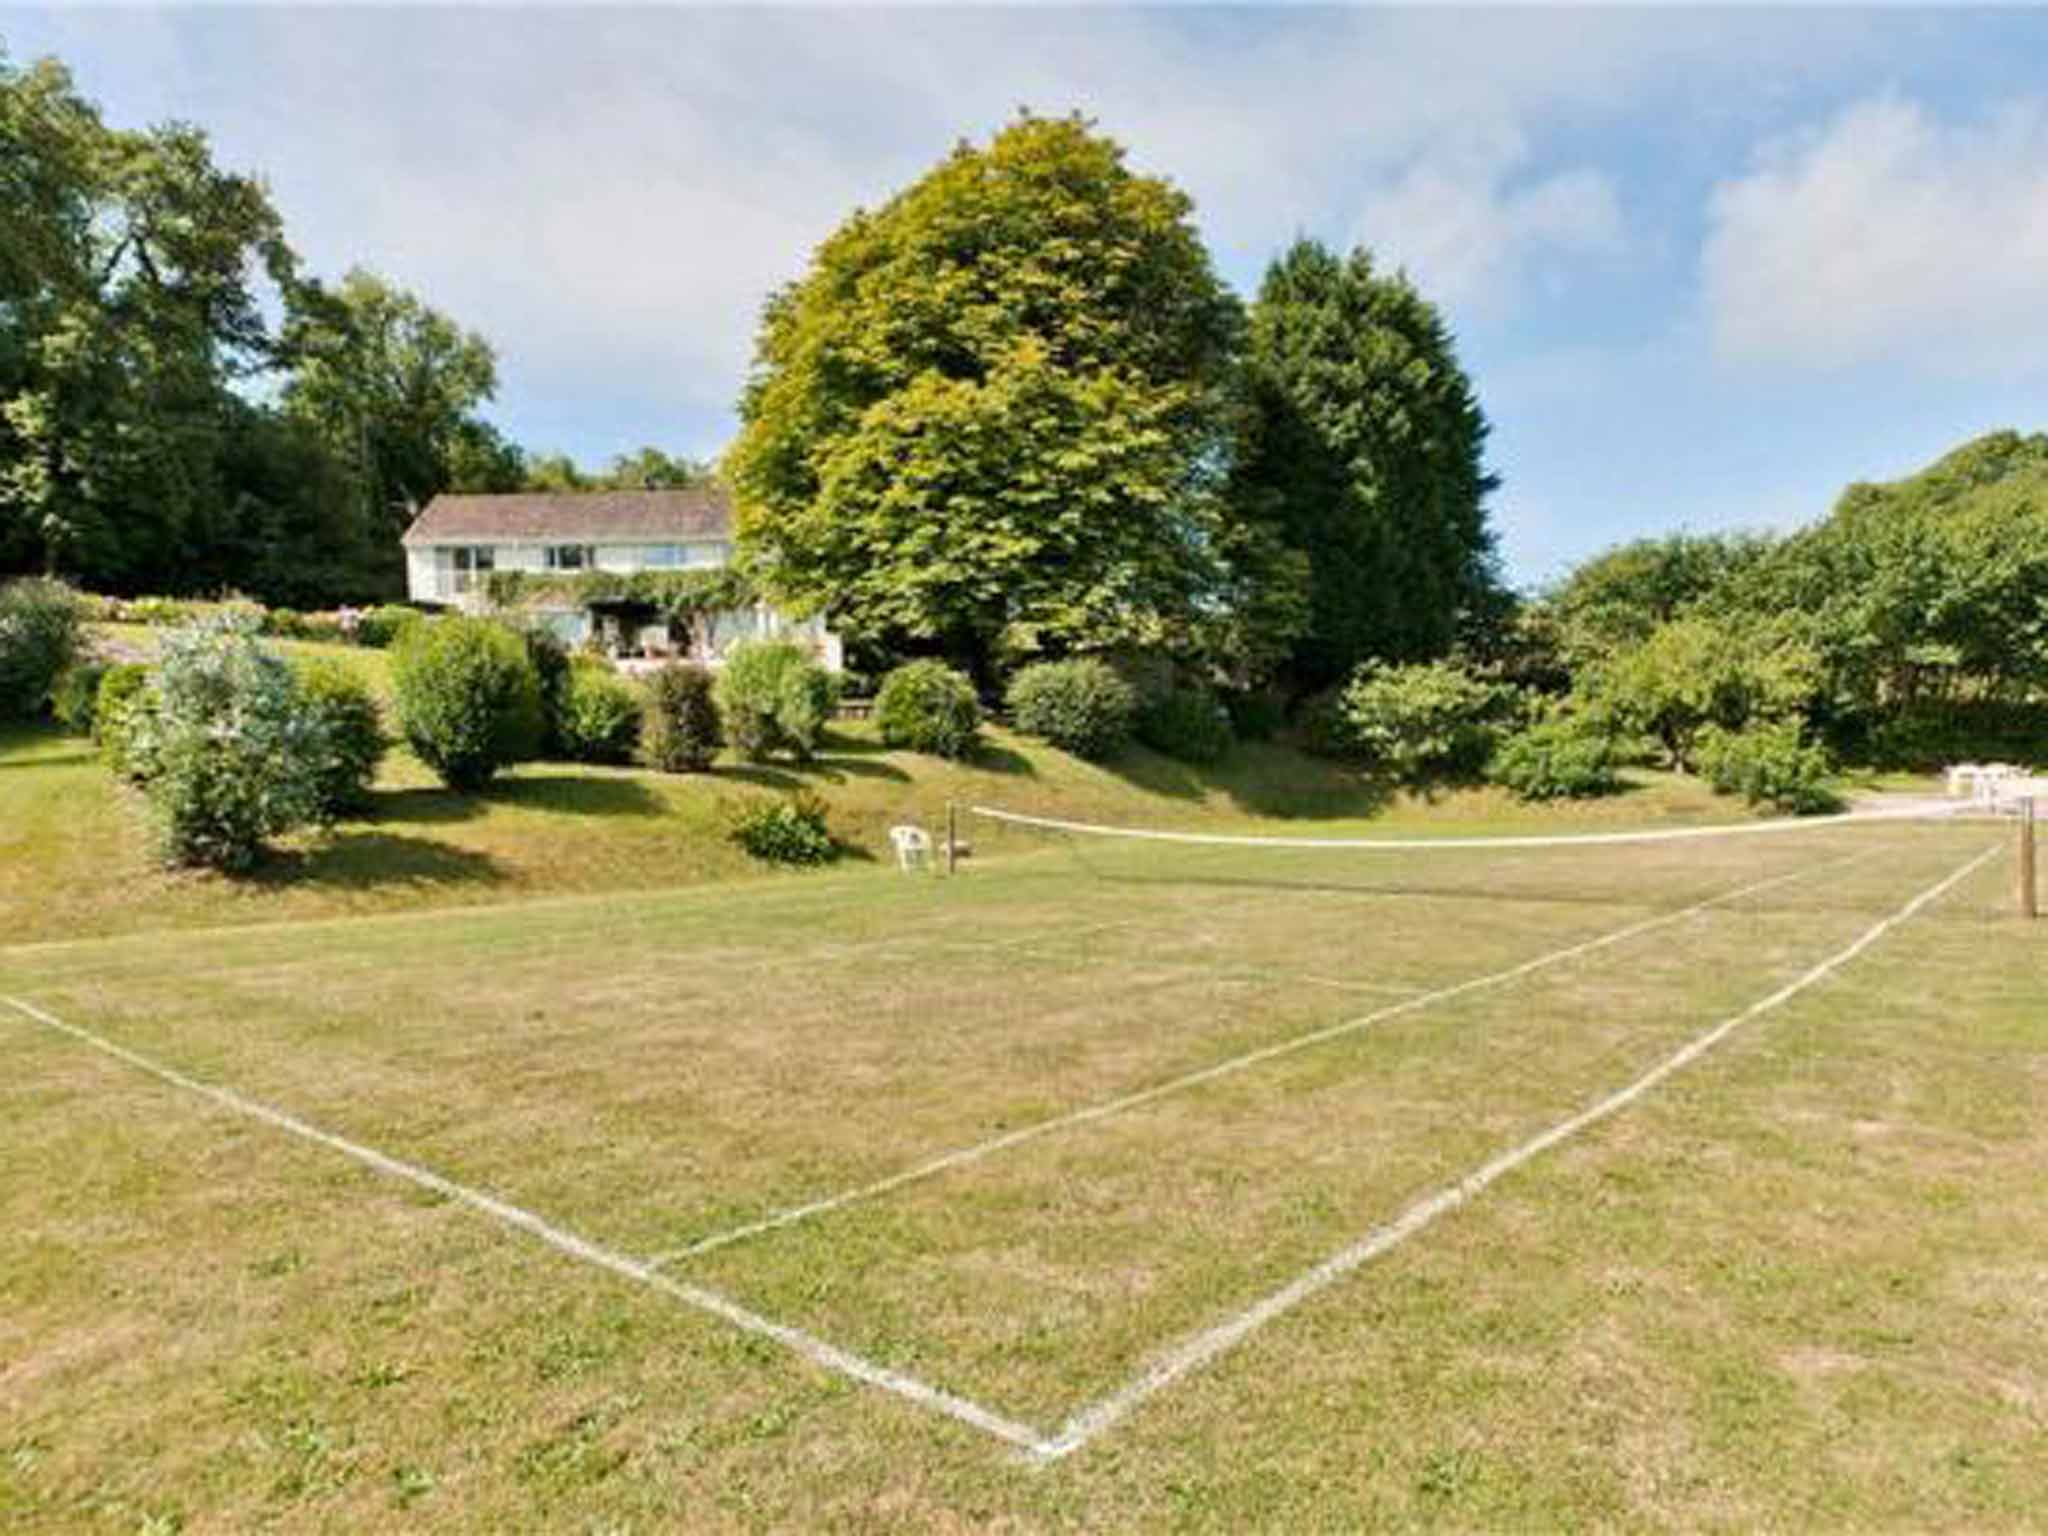 Five bedroom detached house for sale, Oxwich, Gower, Swansea SA3. On with Savills at a guide price of £950,000.